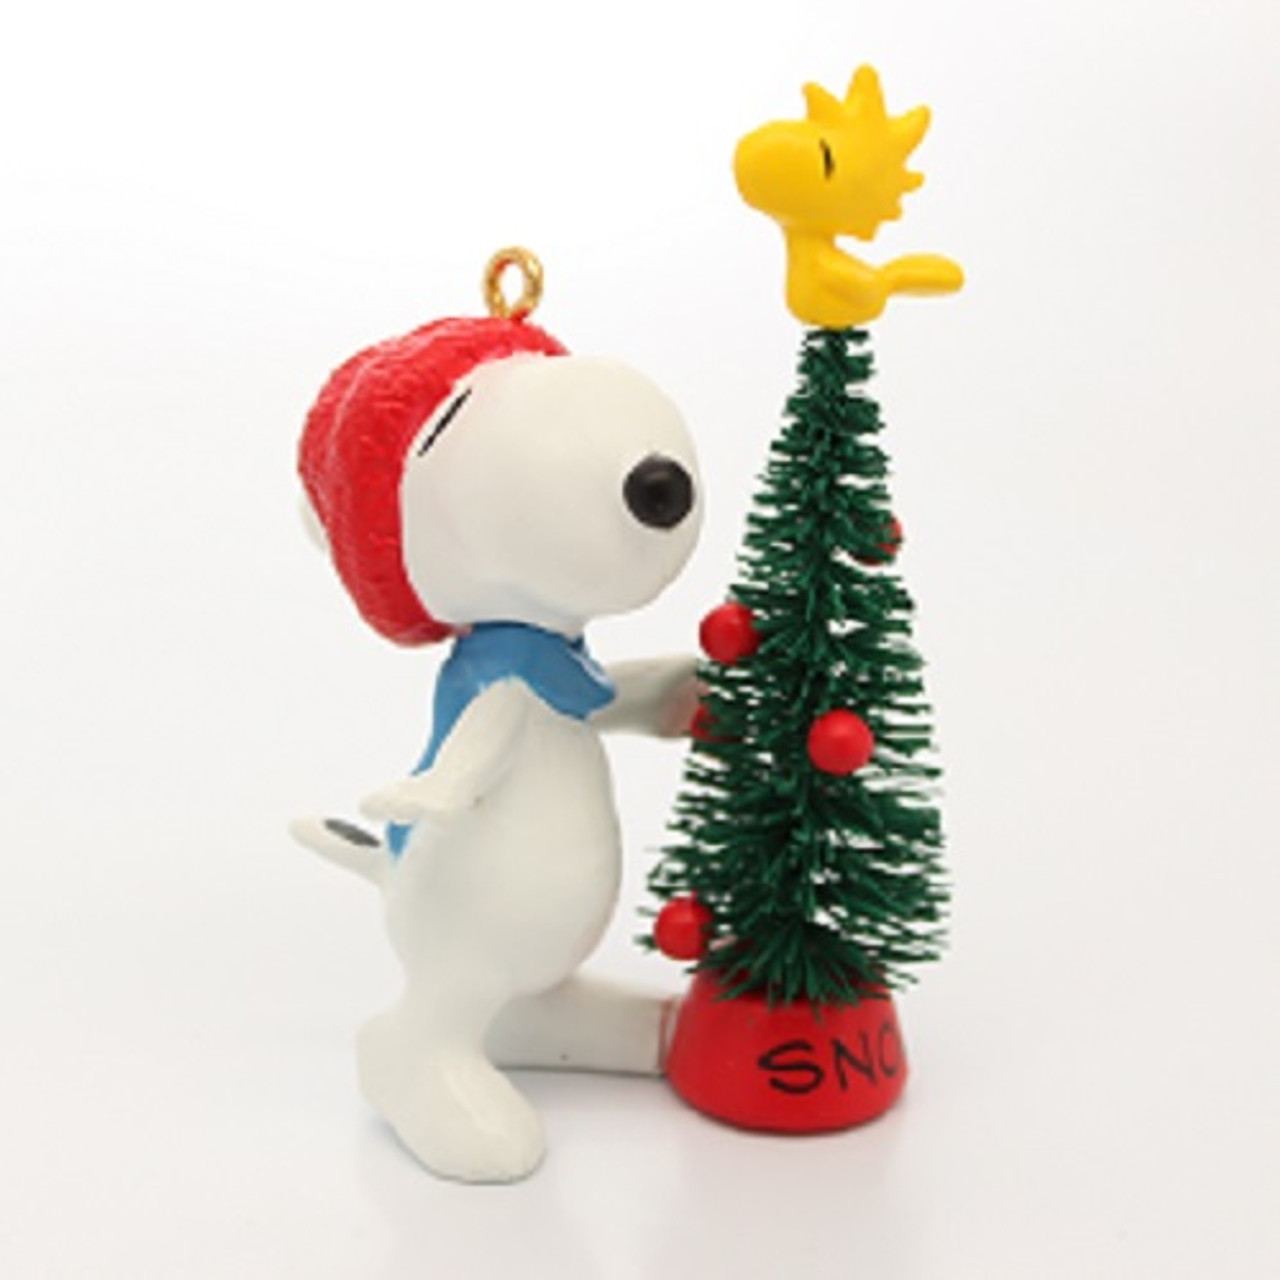 1987 Snoopy And Woodstock Christmas Ornament | The Ornament Shop